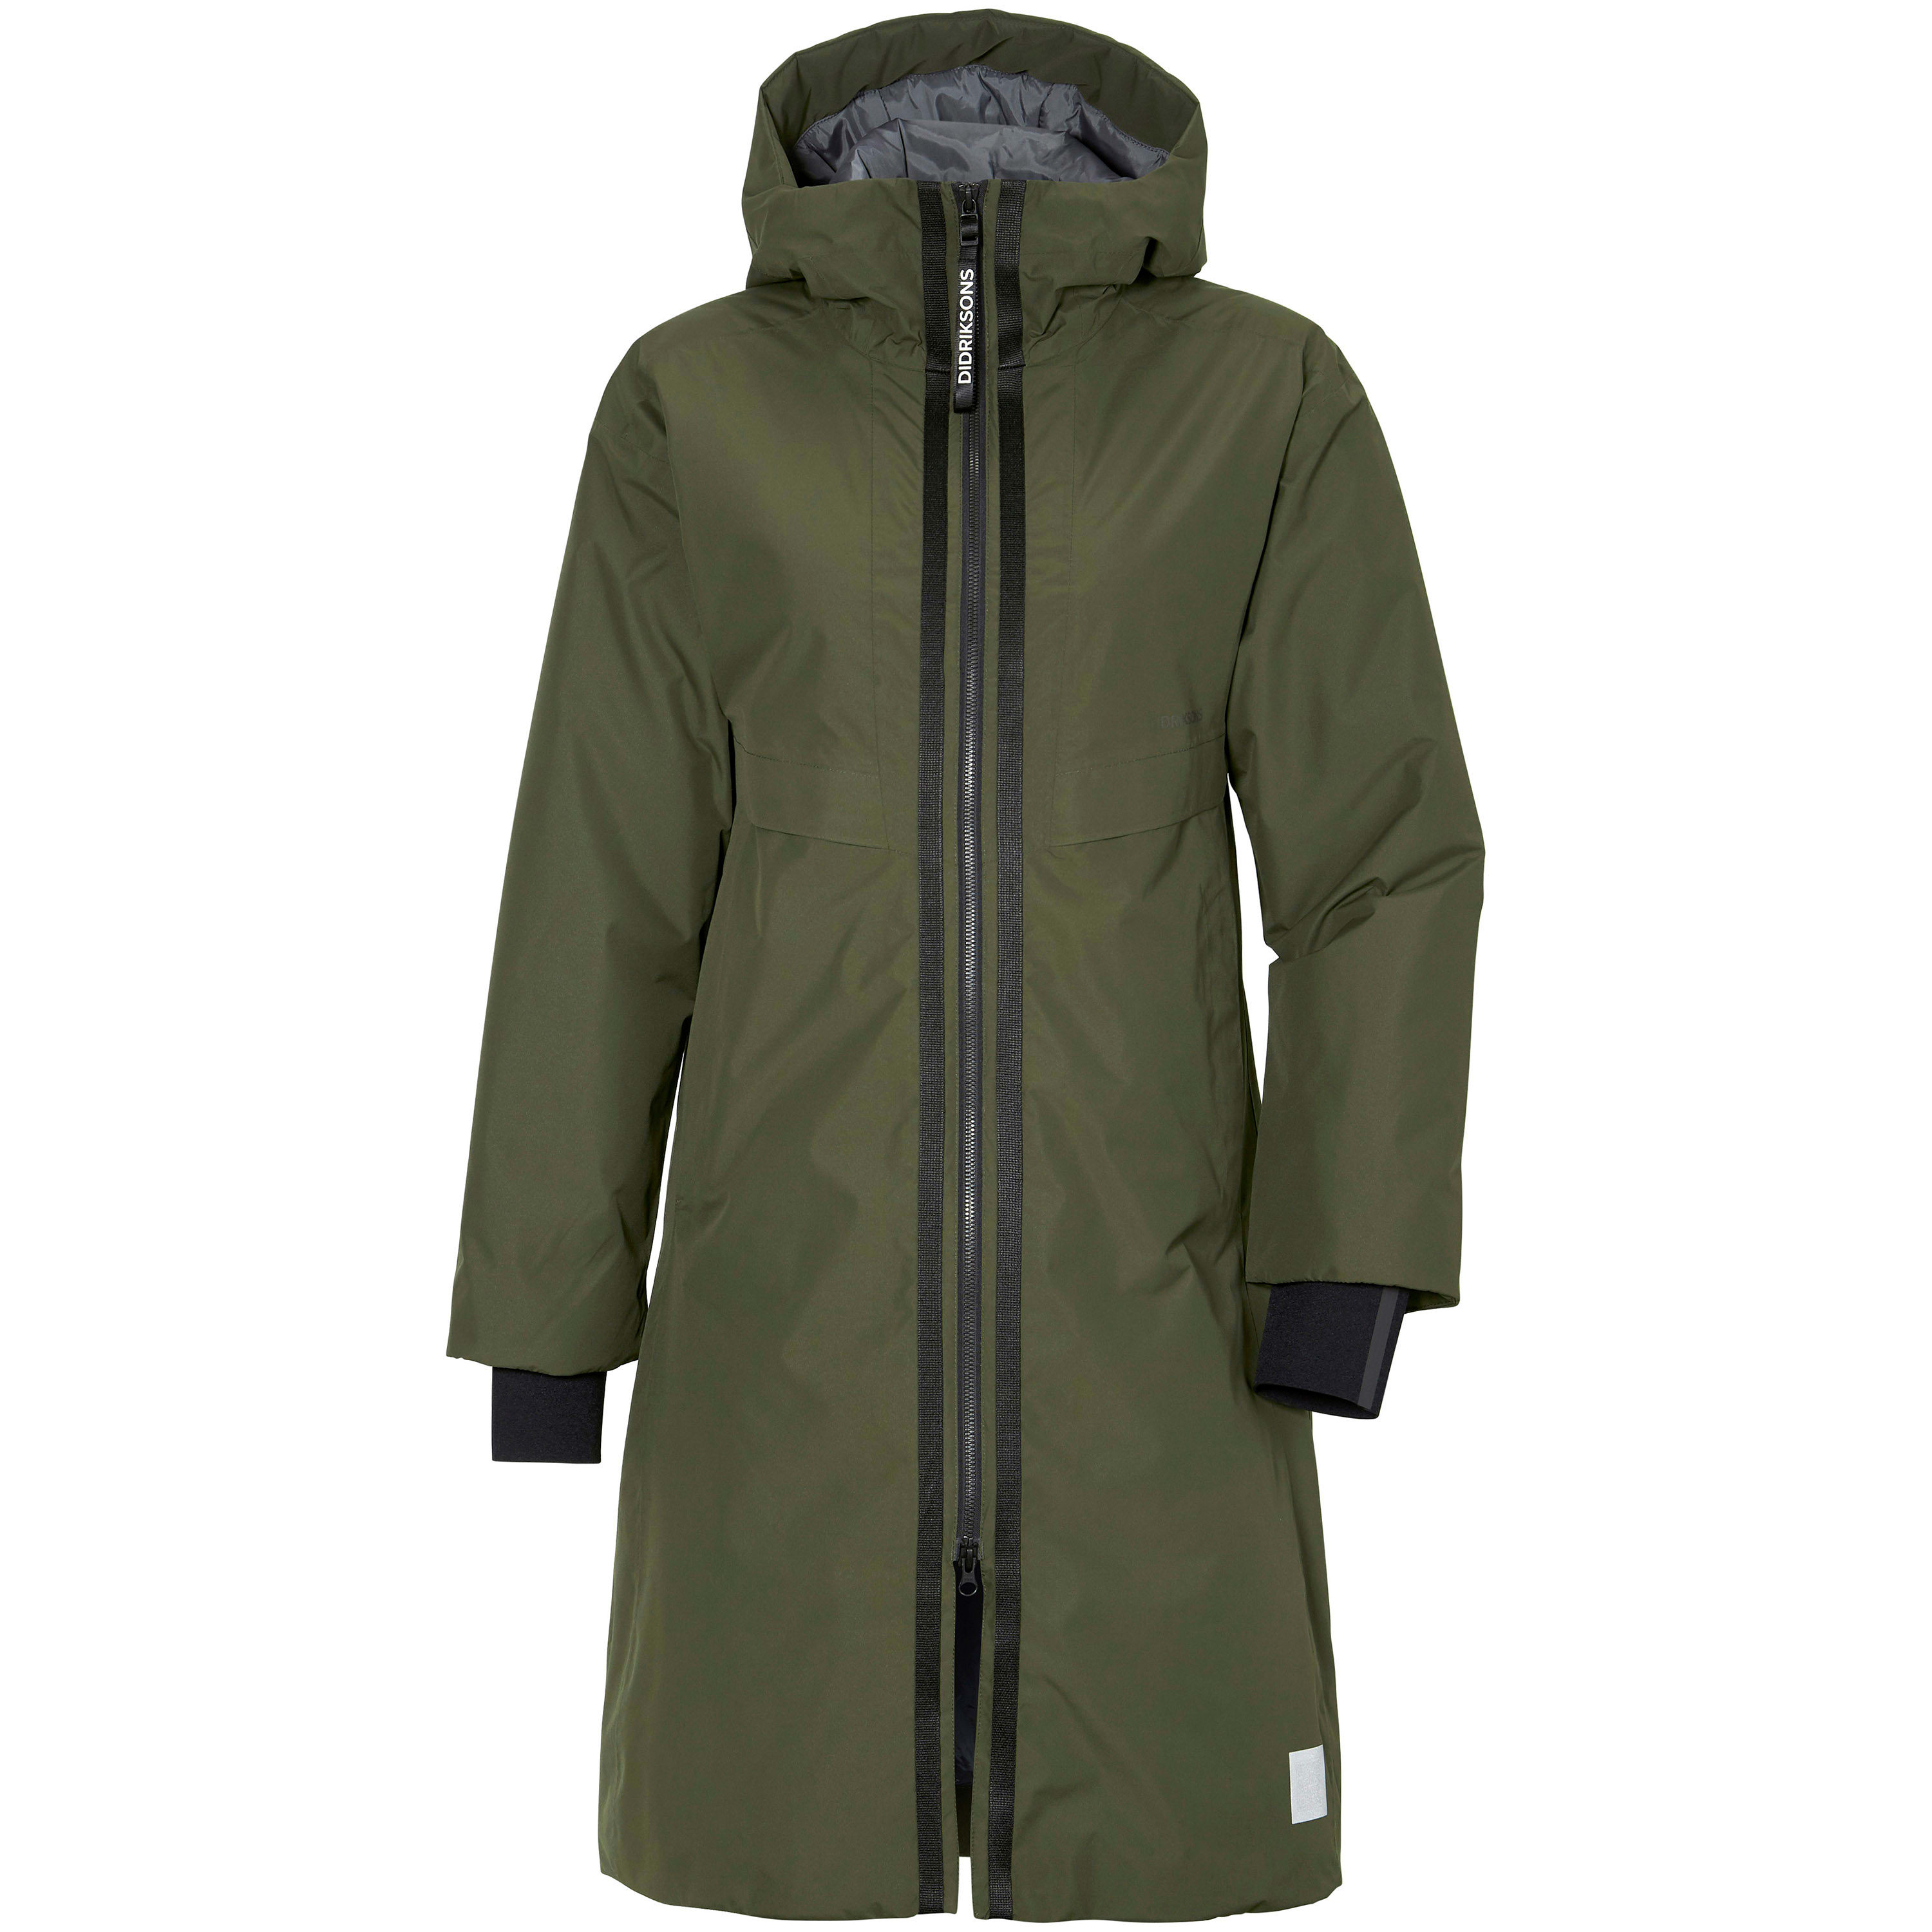 Overjas operator Chemicus Buy Didriksons Aino Women's Parka 3 from Outnorth